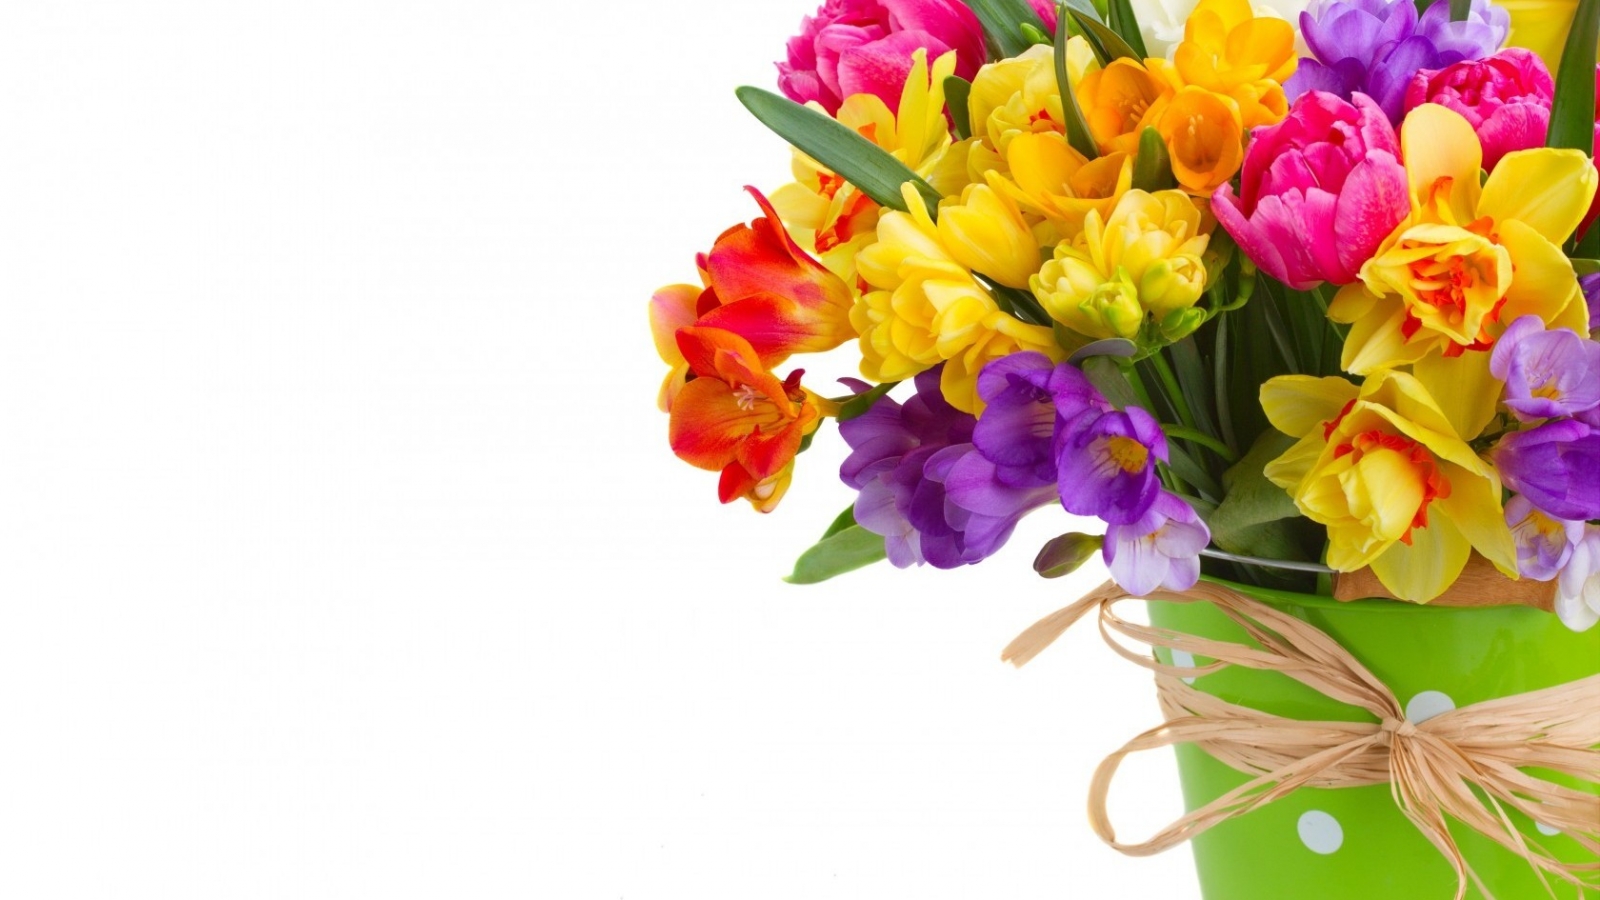 Daffodils and Freesias Bouquet for 1600 x 900 HDTV resolution